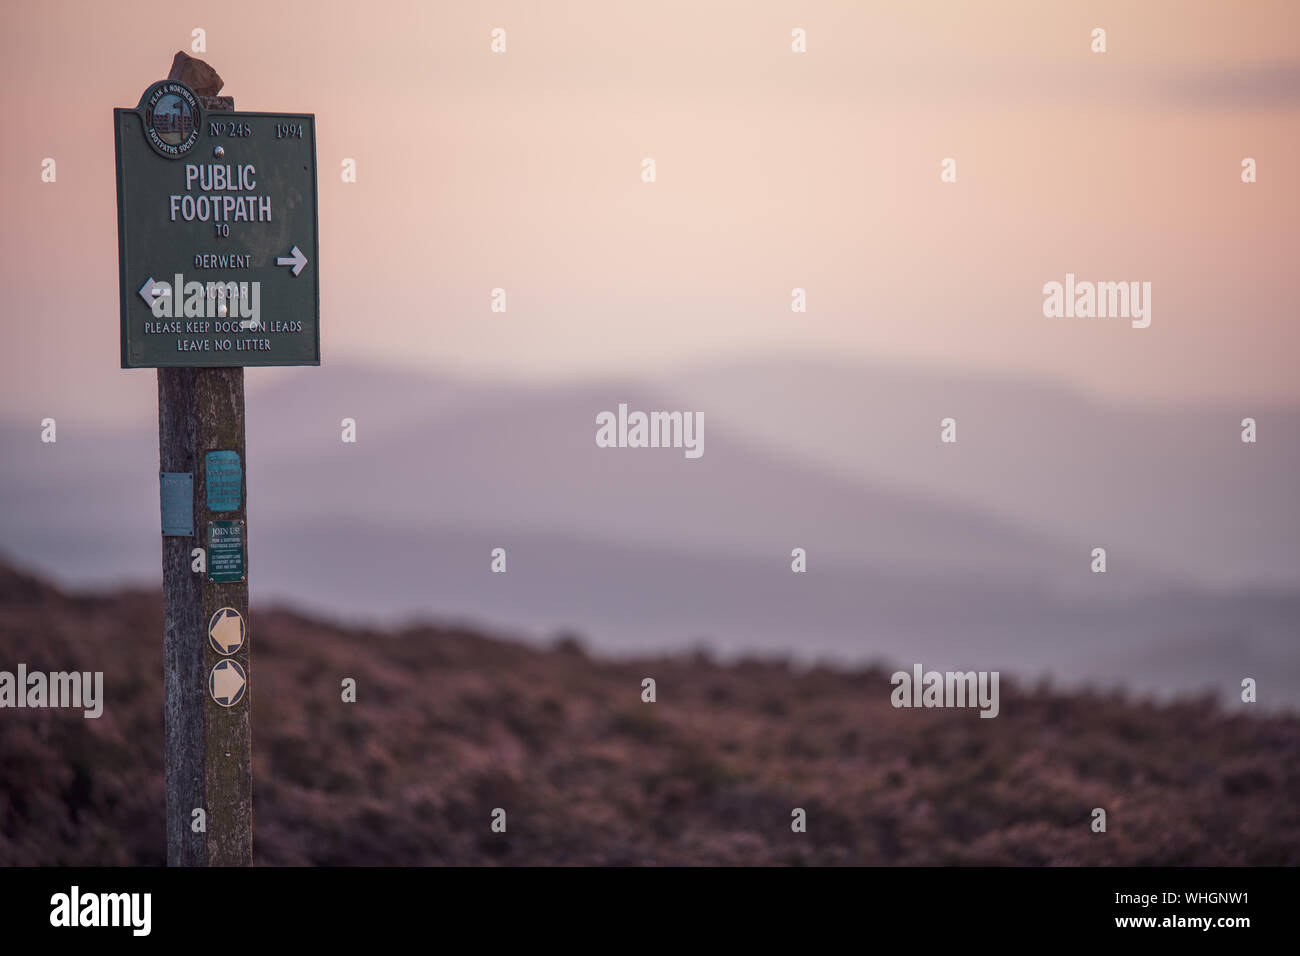 Derbyshire, UK - 26th August 2019: A public Footpath sign taken during a lovely pink sunset in the Peak District National Park Stock Photo